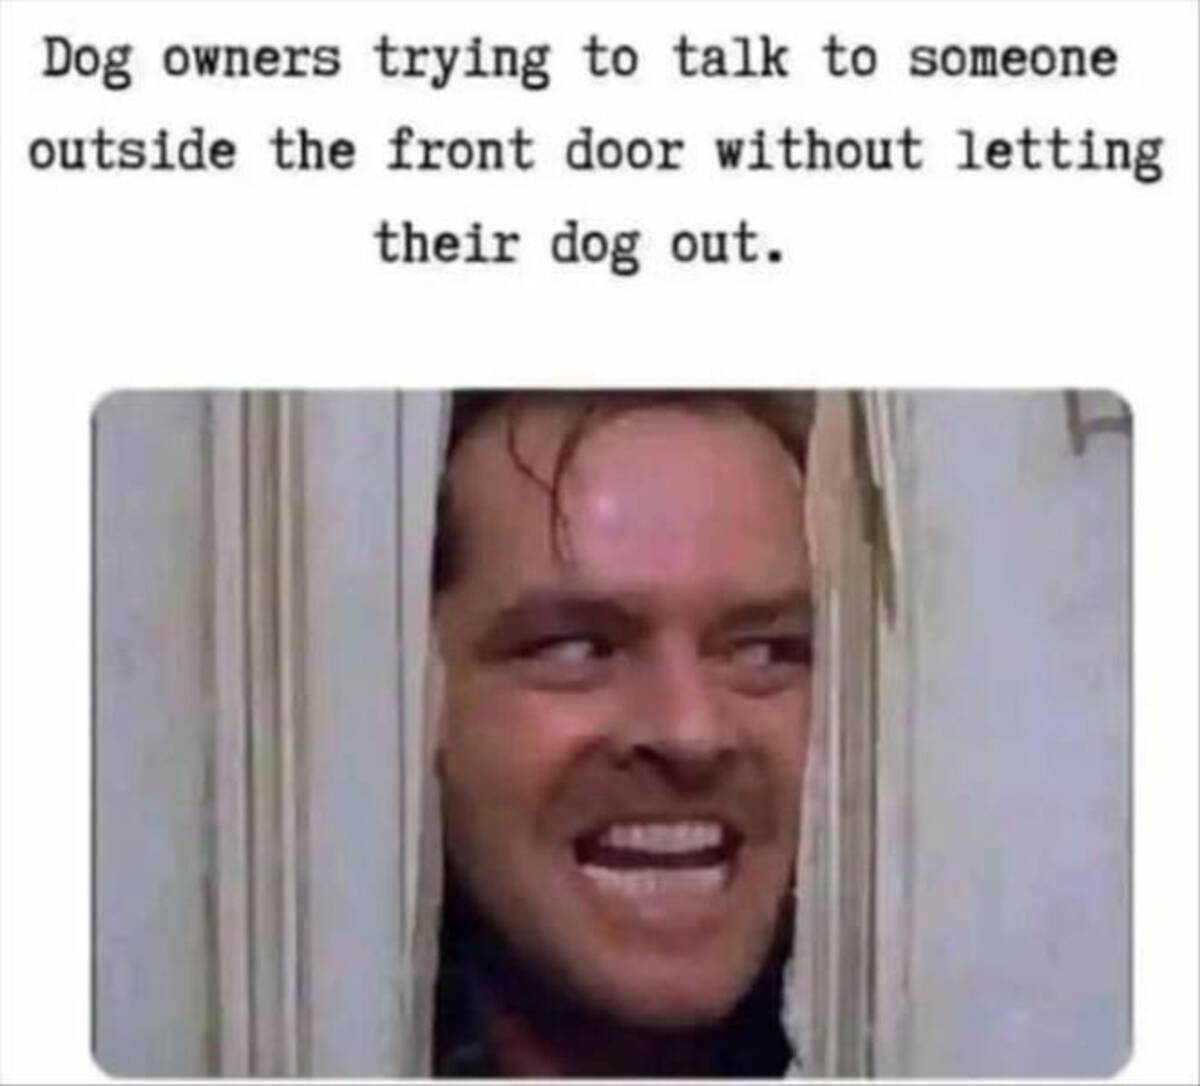 photo caption - Dog owners trying to talk to someone outside the front door without letting their dog out.